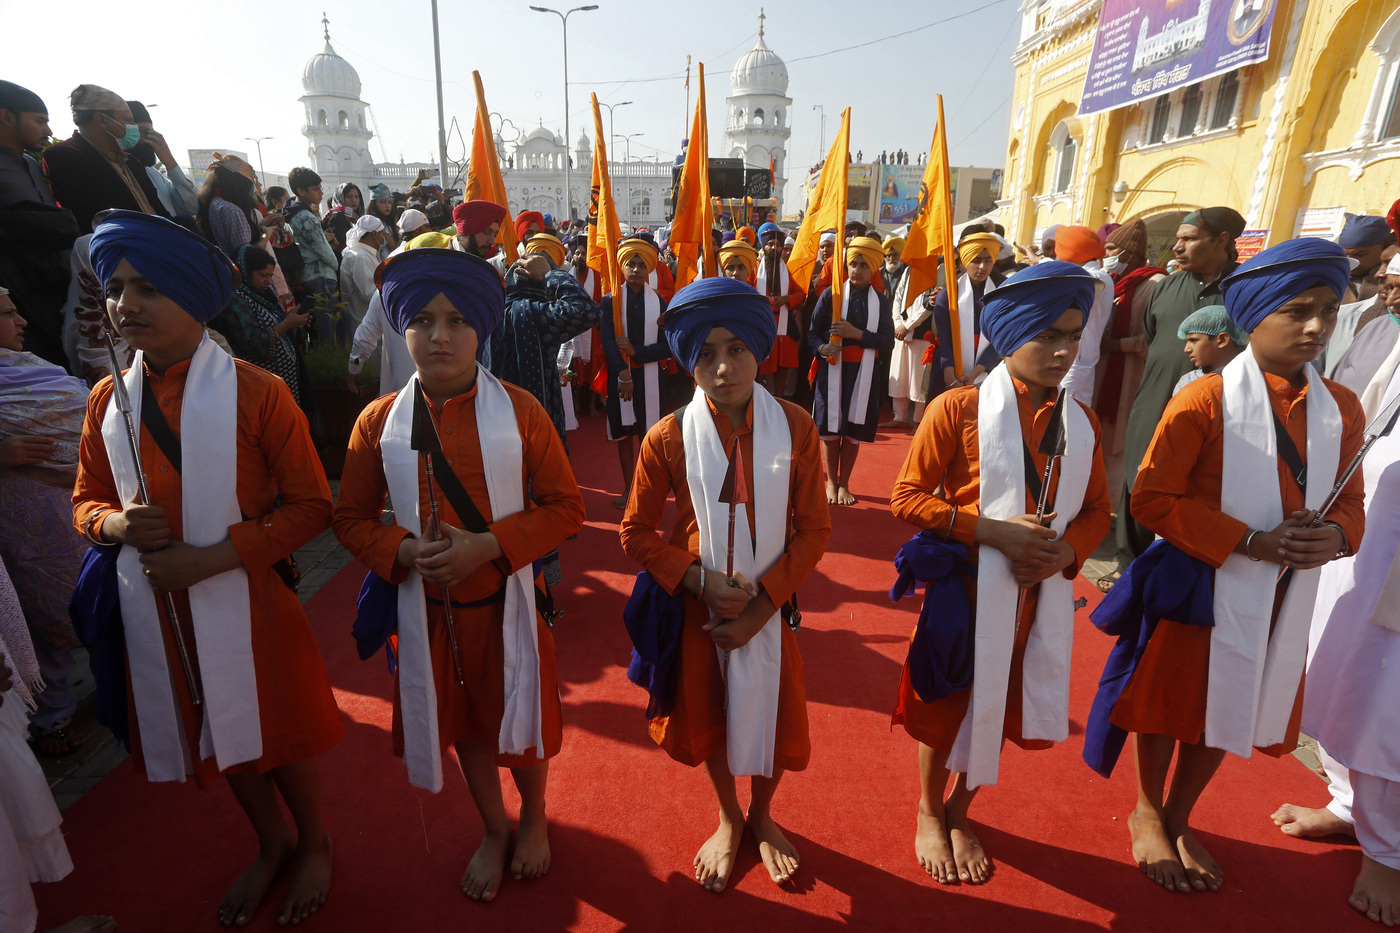 Sikh boys in traditional dress attend a religious festival to celebrate the birth anniversary of their spiritual leader Baba Guru Nanak Dev, at Nankana Sahib, near Lahore, Pakistan, Monday, Nov. 30, 2020. Thousands of pilgrims from various countries arrived in Pakistan to participate in three-day festival to celebrate the 551st birth anniversary of the founder of the Sikh religion. (AP Photo/K.M. Chaudary)